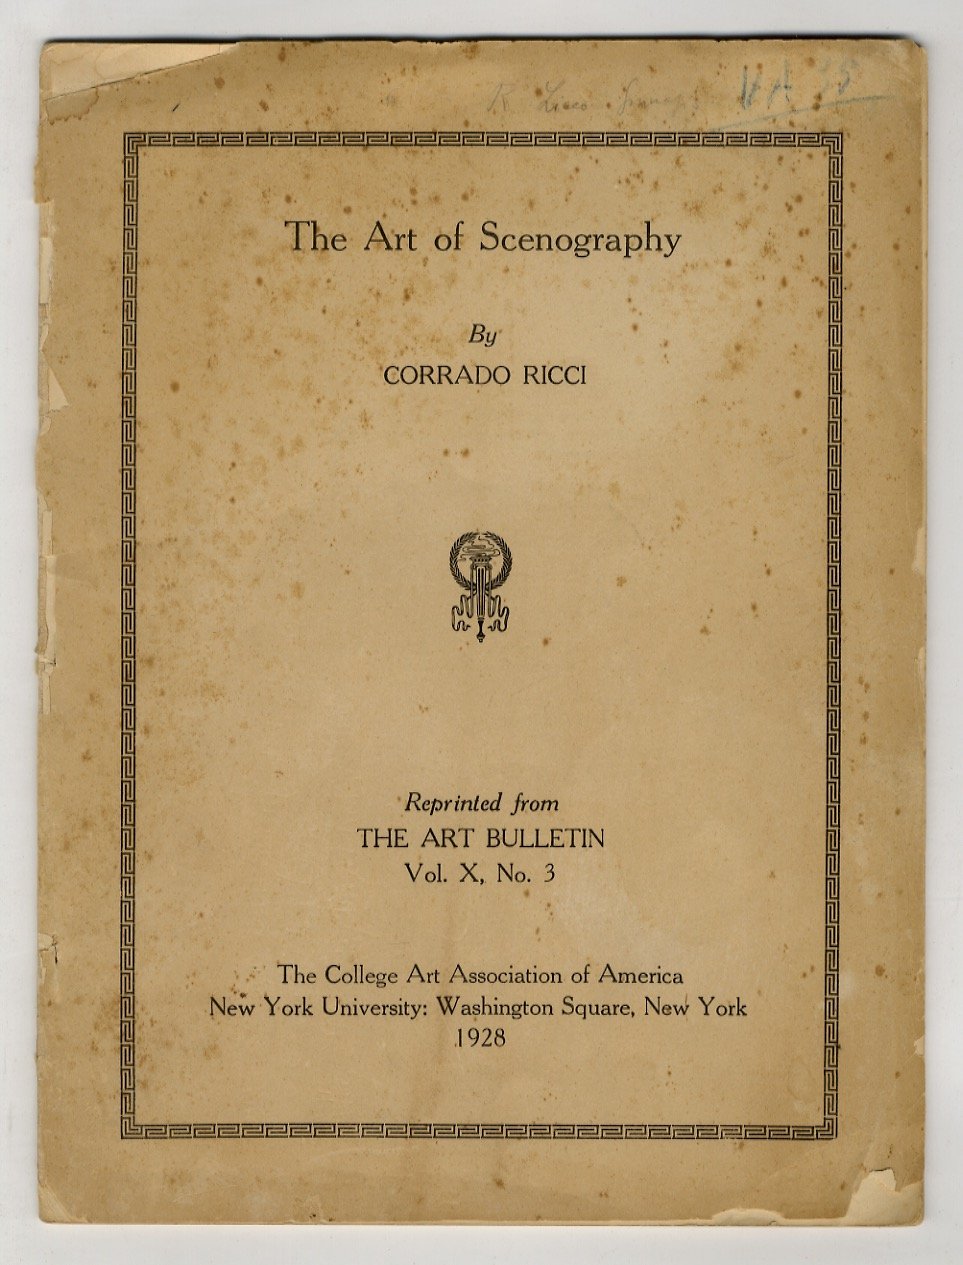 The Art of Scenography. Reprinted from the Art Bulletin vol. …